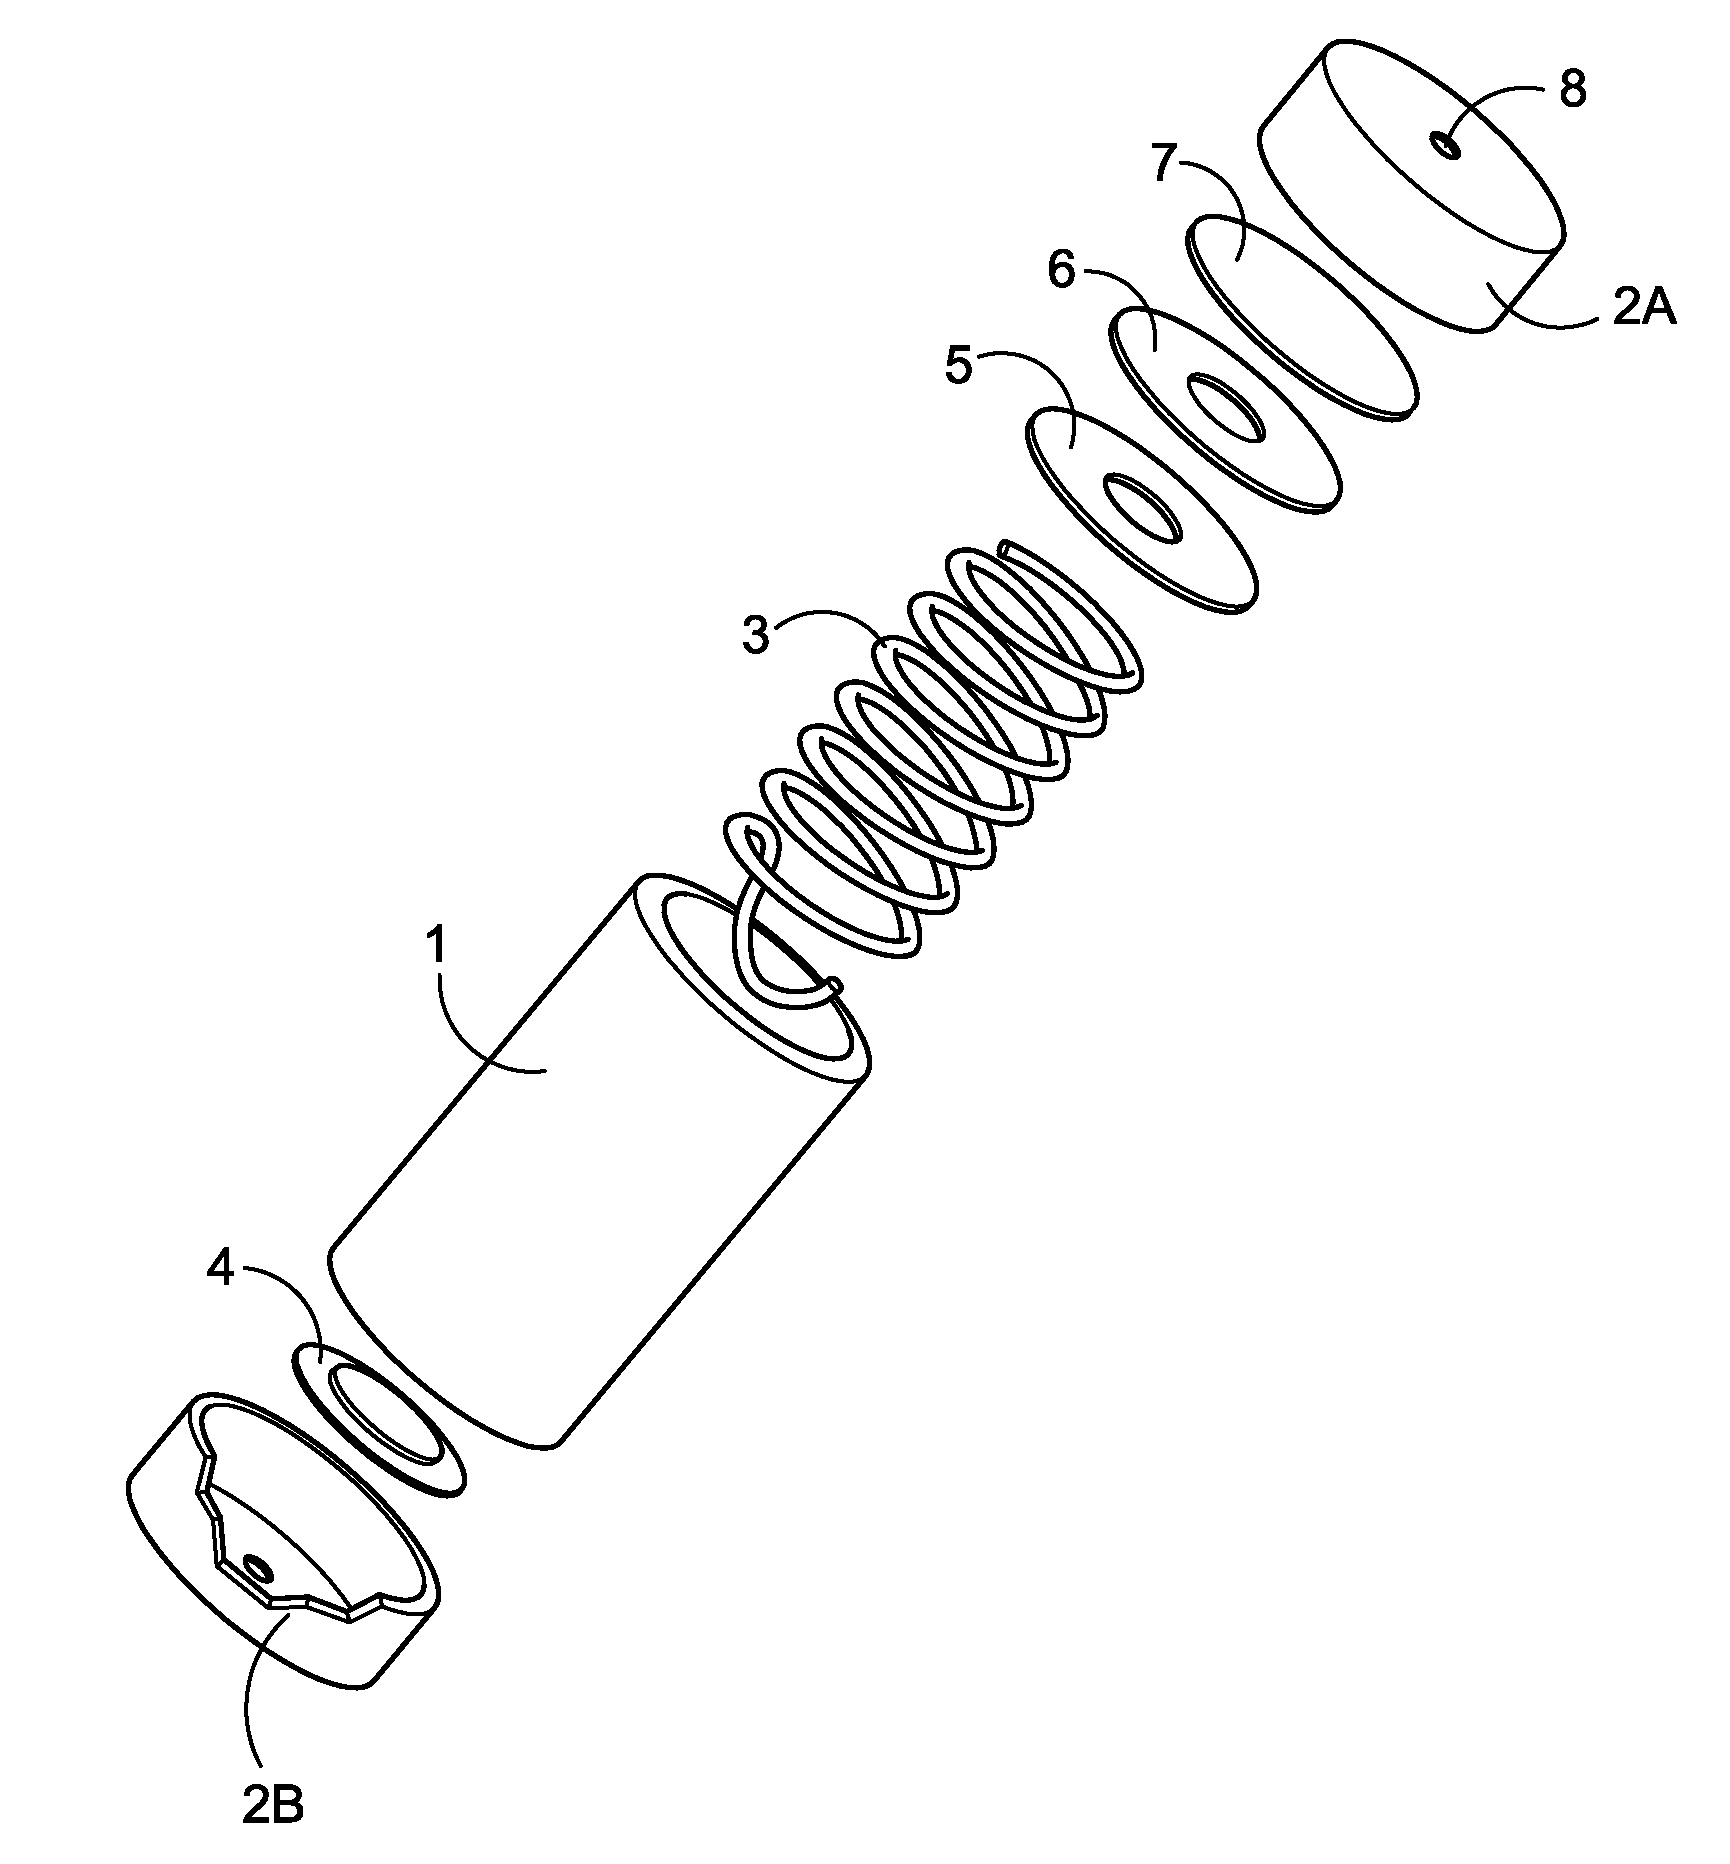 Miniature electrochemical gas generator and power source